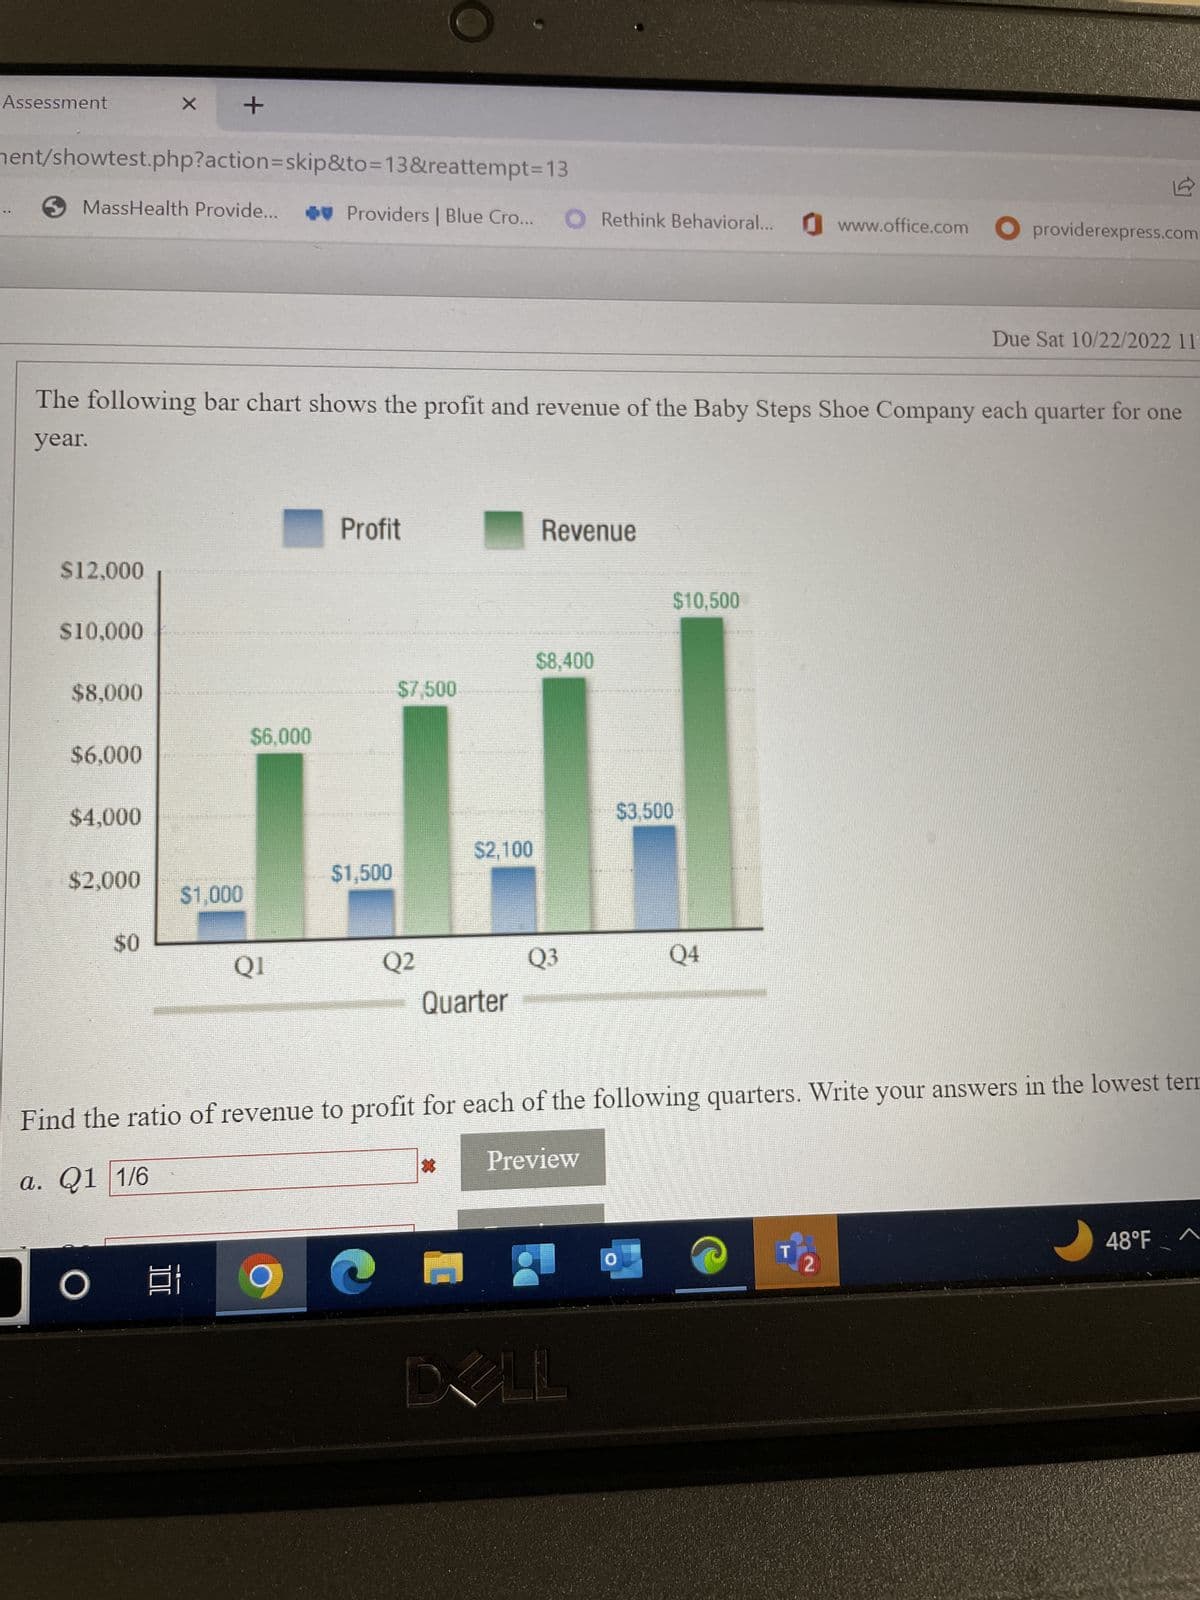 Assessment
ment/showtest.php?action=skip&to=13&reattempt=13
MassHealth Provide...
$12,000
$10,000
The following bar chart shows the profit and revenue of the Baby Steps Shoe Company each quarter for one
year.
$8,000
$6,000
$4,000
$2,000
X +
$0
O
KUTOK AUCTO
100:
$1,000
WEMA DE SABLE UN
$6,000
QI
Providers | Blue Cro... O Rethink Behavioral... www.office.com providerexpress.com
Profit
Let Me Be
$1,500
$7,500
S
Q2
$2,100
Quarter
*
Revenue
$8,400
Q3
$10,500
Find the ratio of revenue to profit for each of the following quarters. Write your answers in the lowest tern
a. Q1 1/6
Preview
DELL
**A DE ED
$3,500
Q4
Due Sat 10/22/2022 11:
2
48°F
A